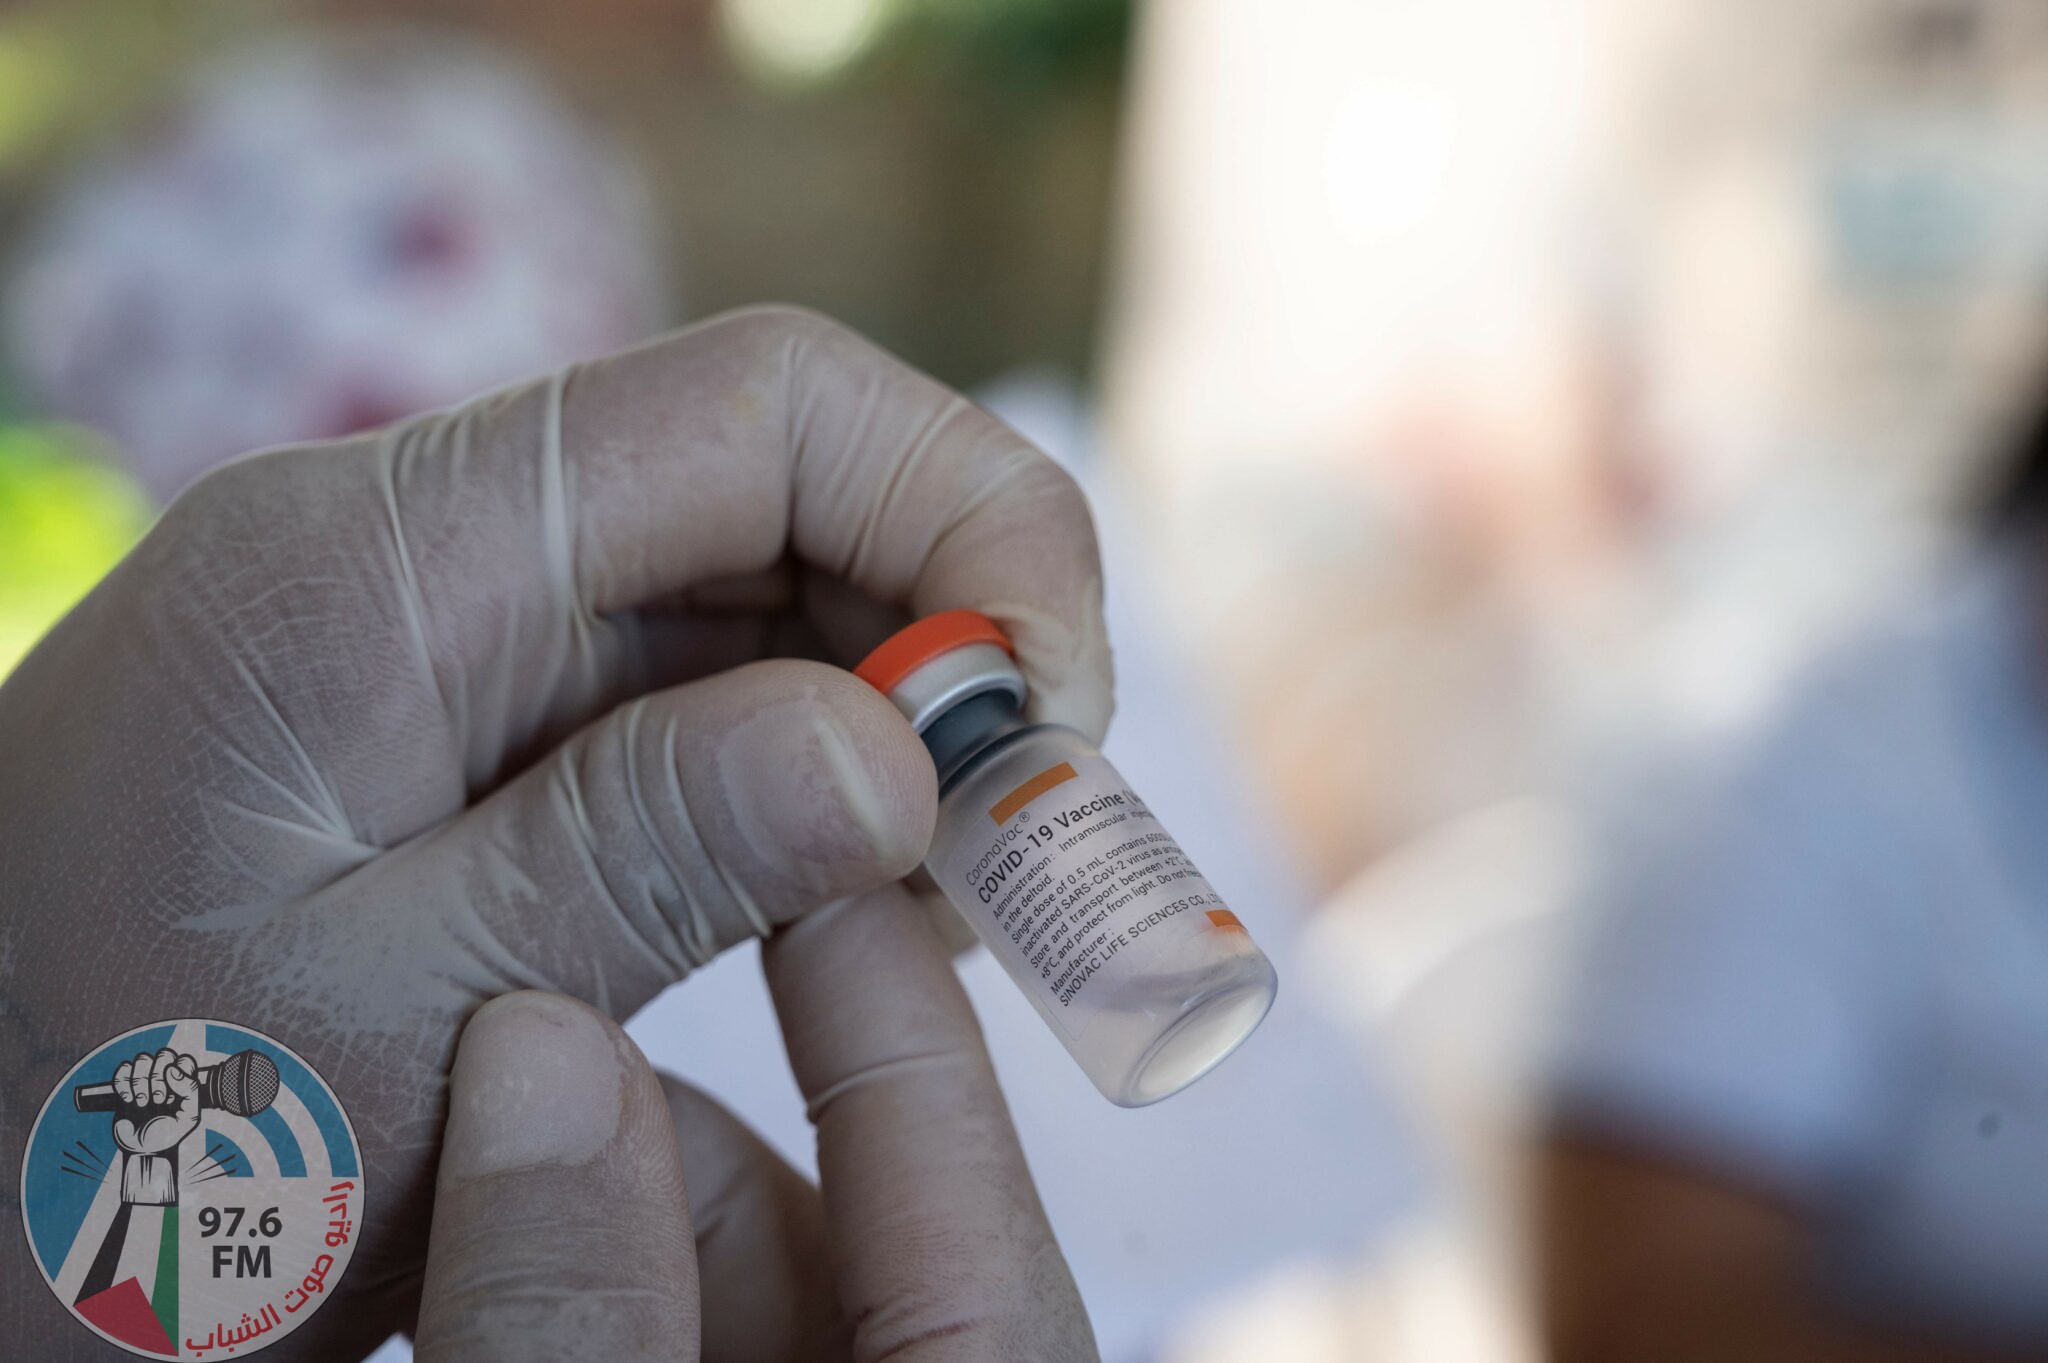 A Colombian health worker prepares a dose of the CoronaVac vaccine against COVID-19 to inoculate a Venezuelan child between 2 and 11 years old at the Francisco de Paula Santander International Bridge in the border city of Cucuta, Colombia on November 13, 2021. (Photo by Yuri CORTEZ / AFP)